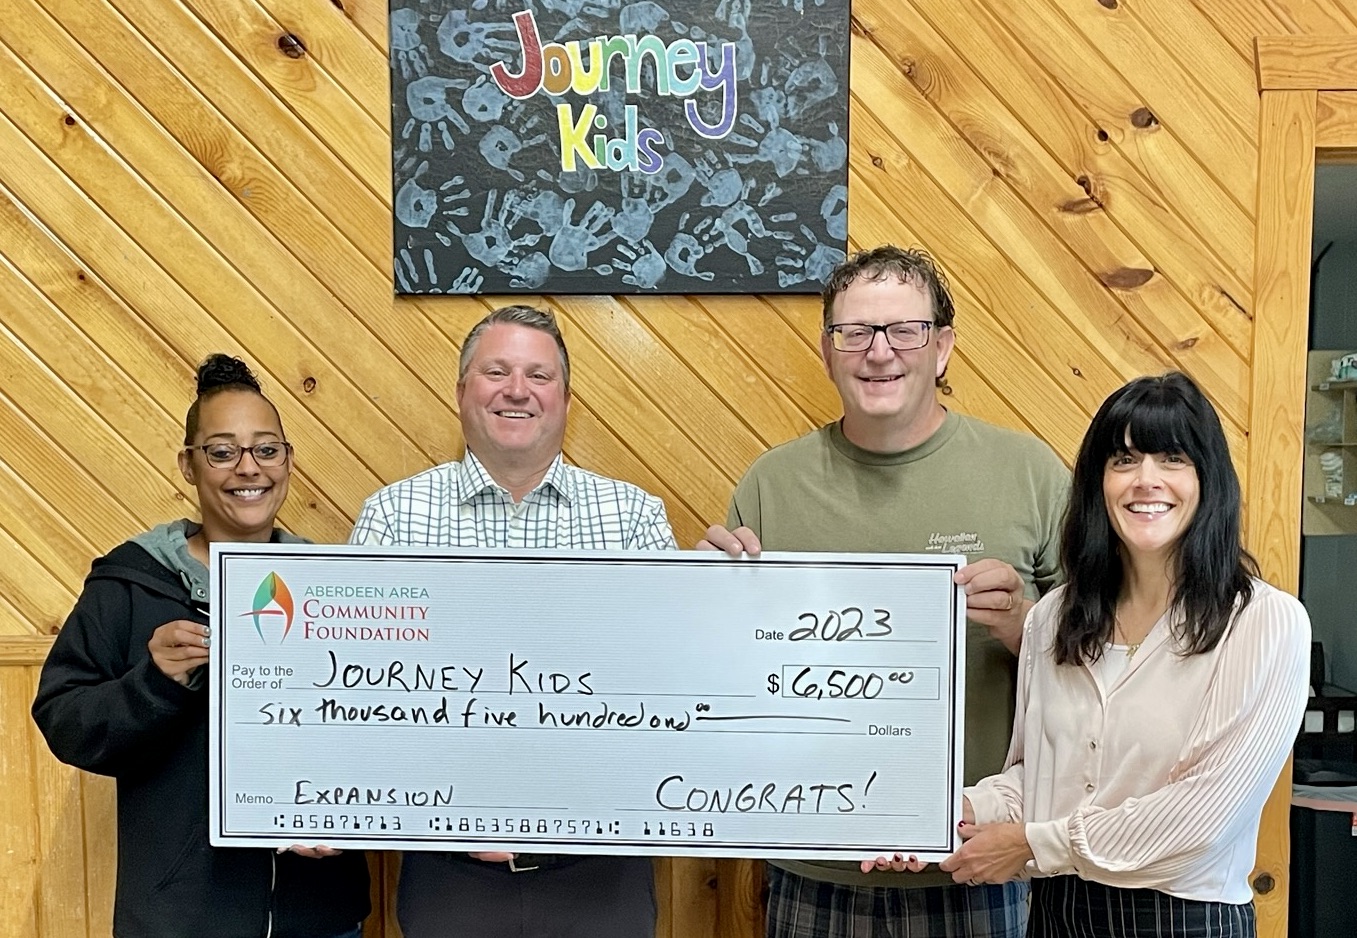 Journey Church’s Journey Kids Daycare Program received $6,500 for expansions in its program. Pictured, from left, are Nicole Phillips, Journey Kids director; Heath Johnson, Aberdeen Area Community Foundation chairman; Devin Hebeisen, Journey Church pastor; and Megan Biegler, Aberdeen Area Community Foundation vice chairwoman. Courtesy photo